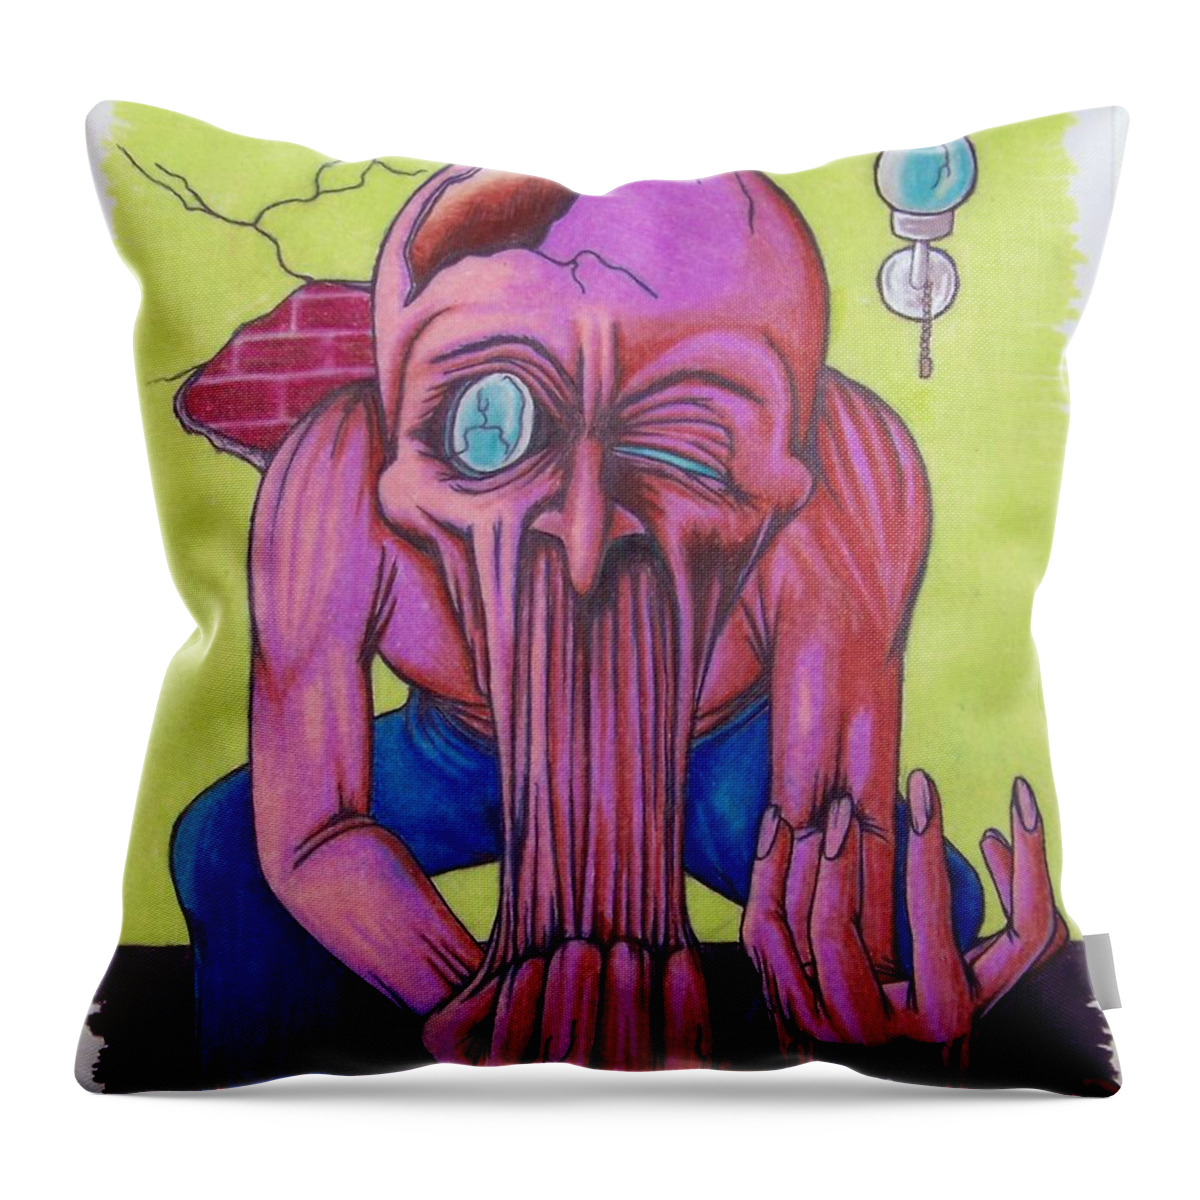 Tmad Throw Pillow featuring the drawing Stretching The Truth by Michael TMAD Finney